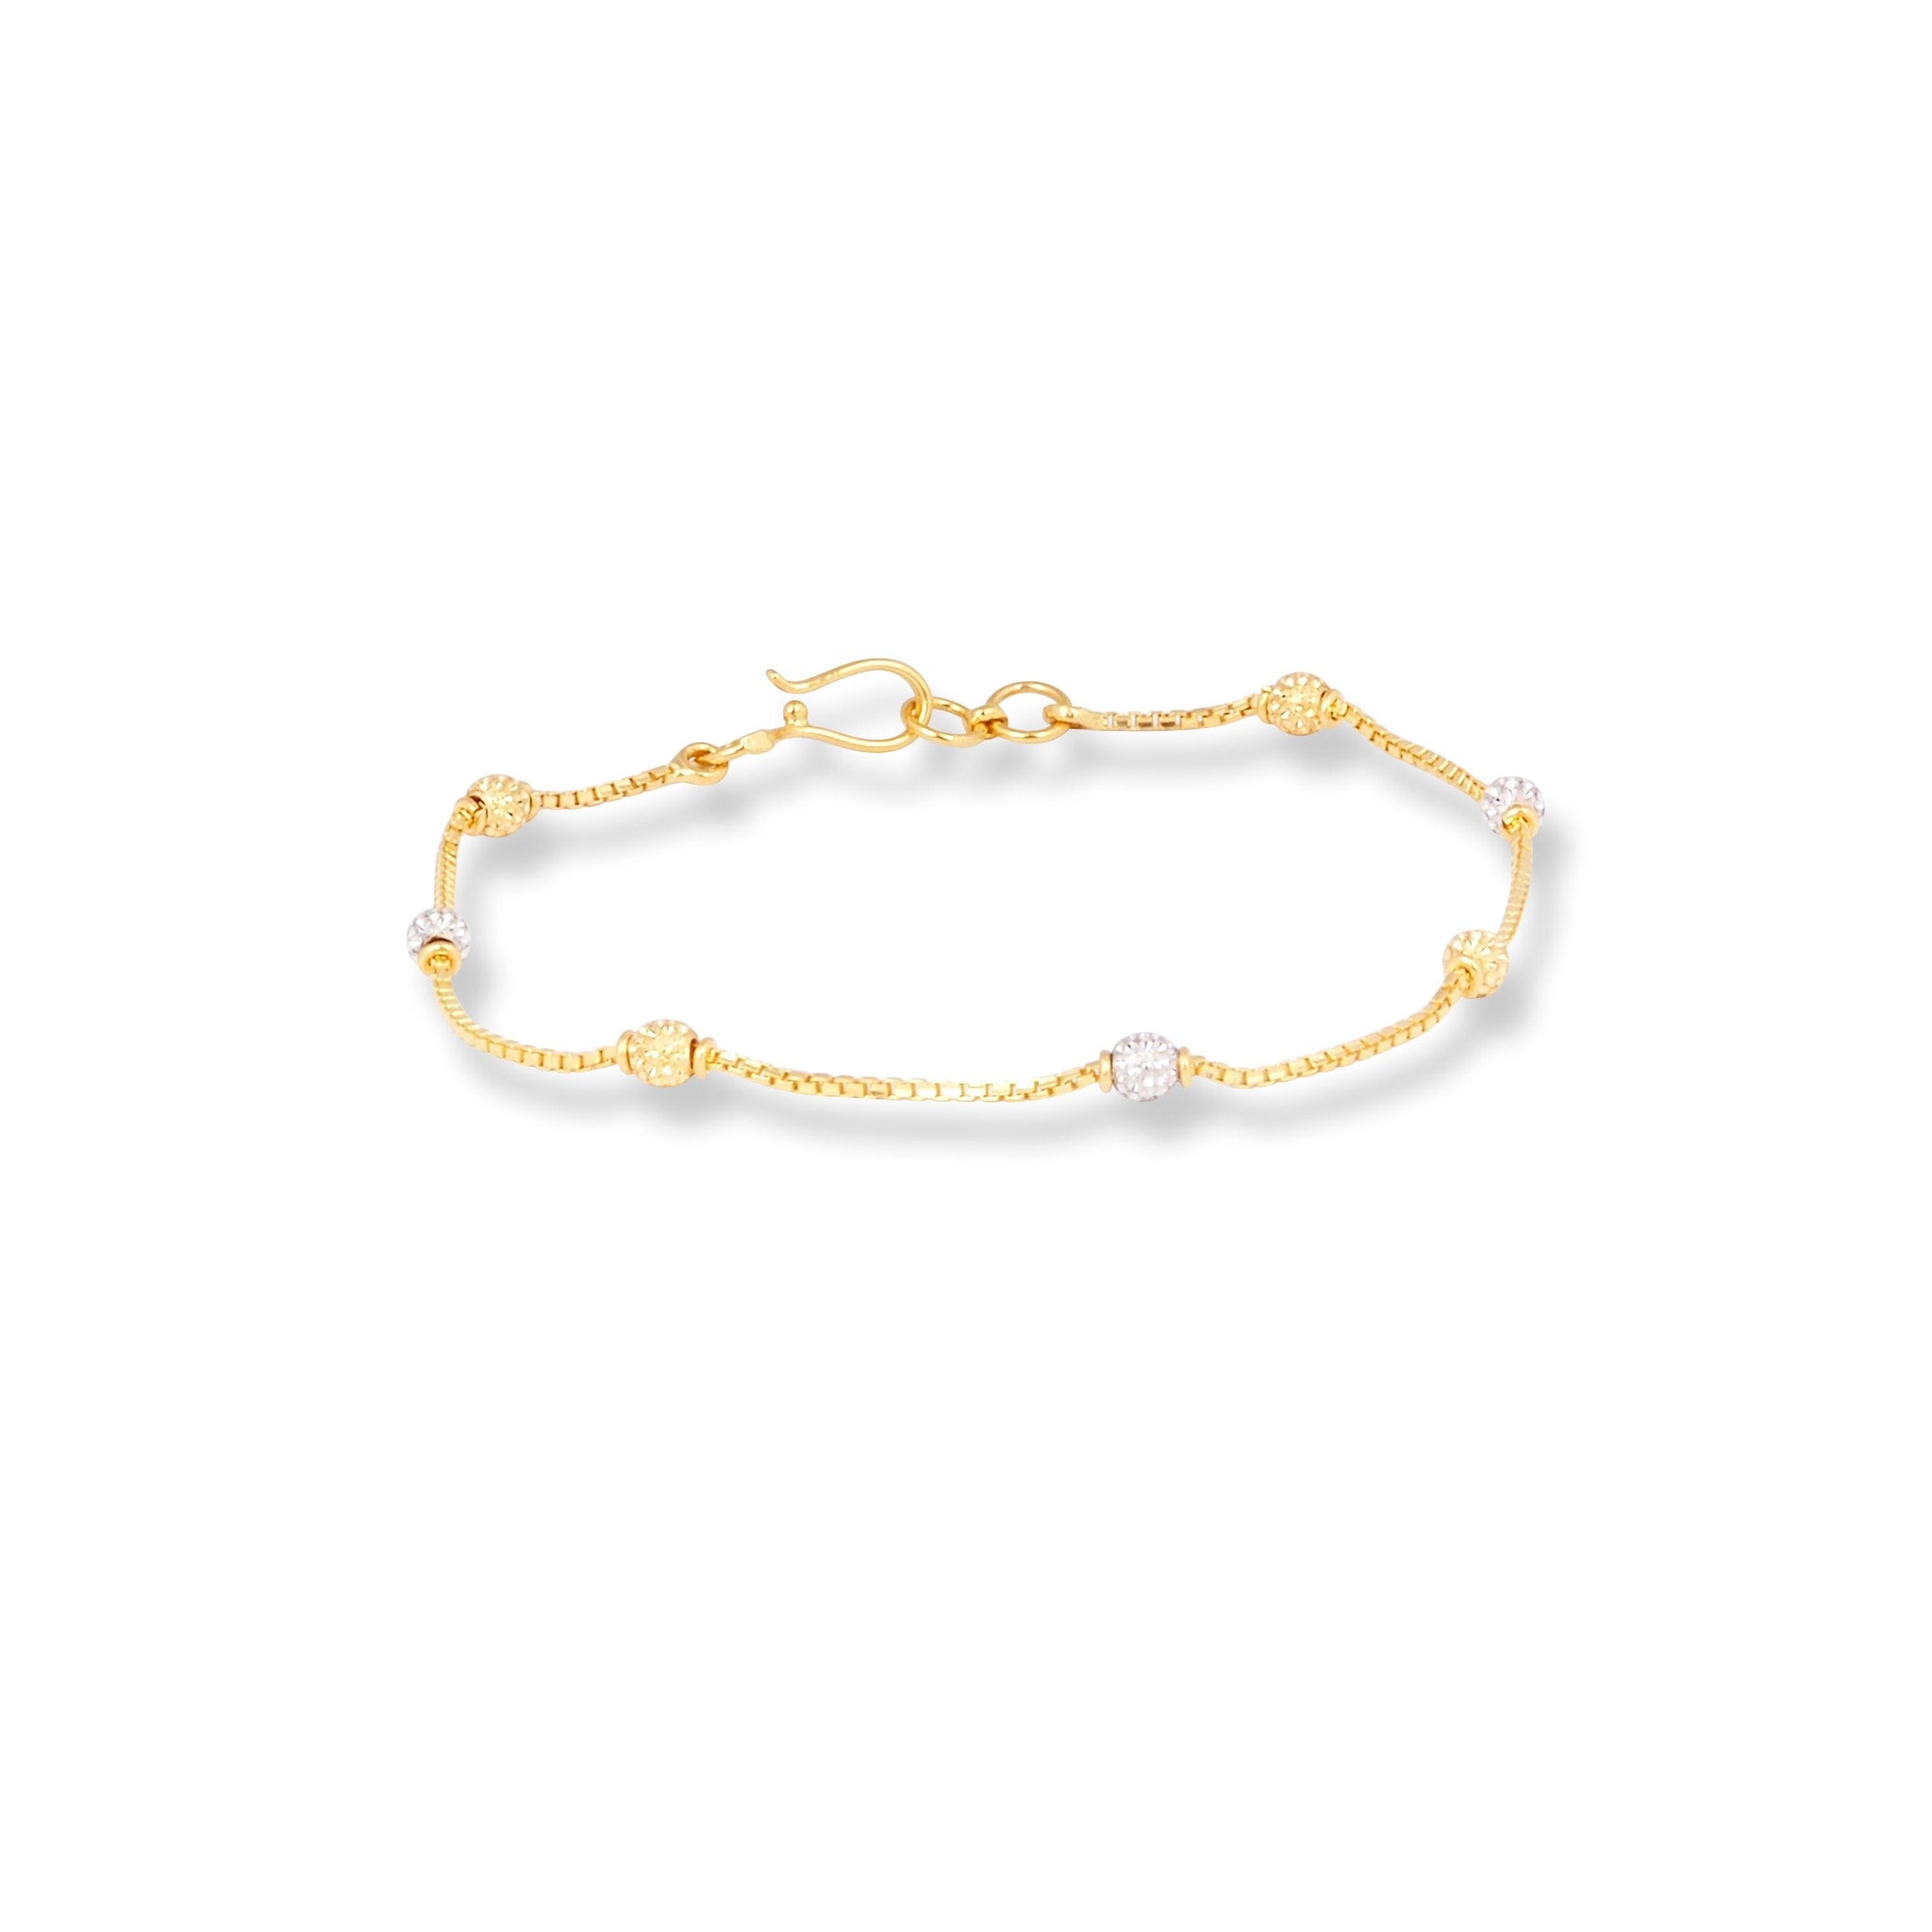 22ct Gold Box Chain Bracelet with Plain Gold and Rhodium Diamond Cut Gold Beads and Hook Clasp (3.2g) LBR-8479Rb